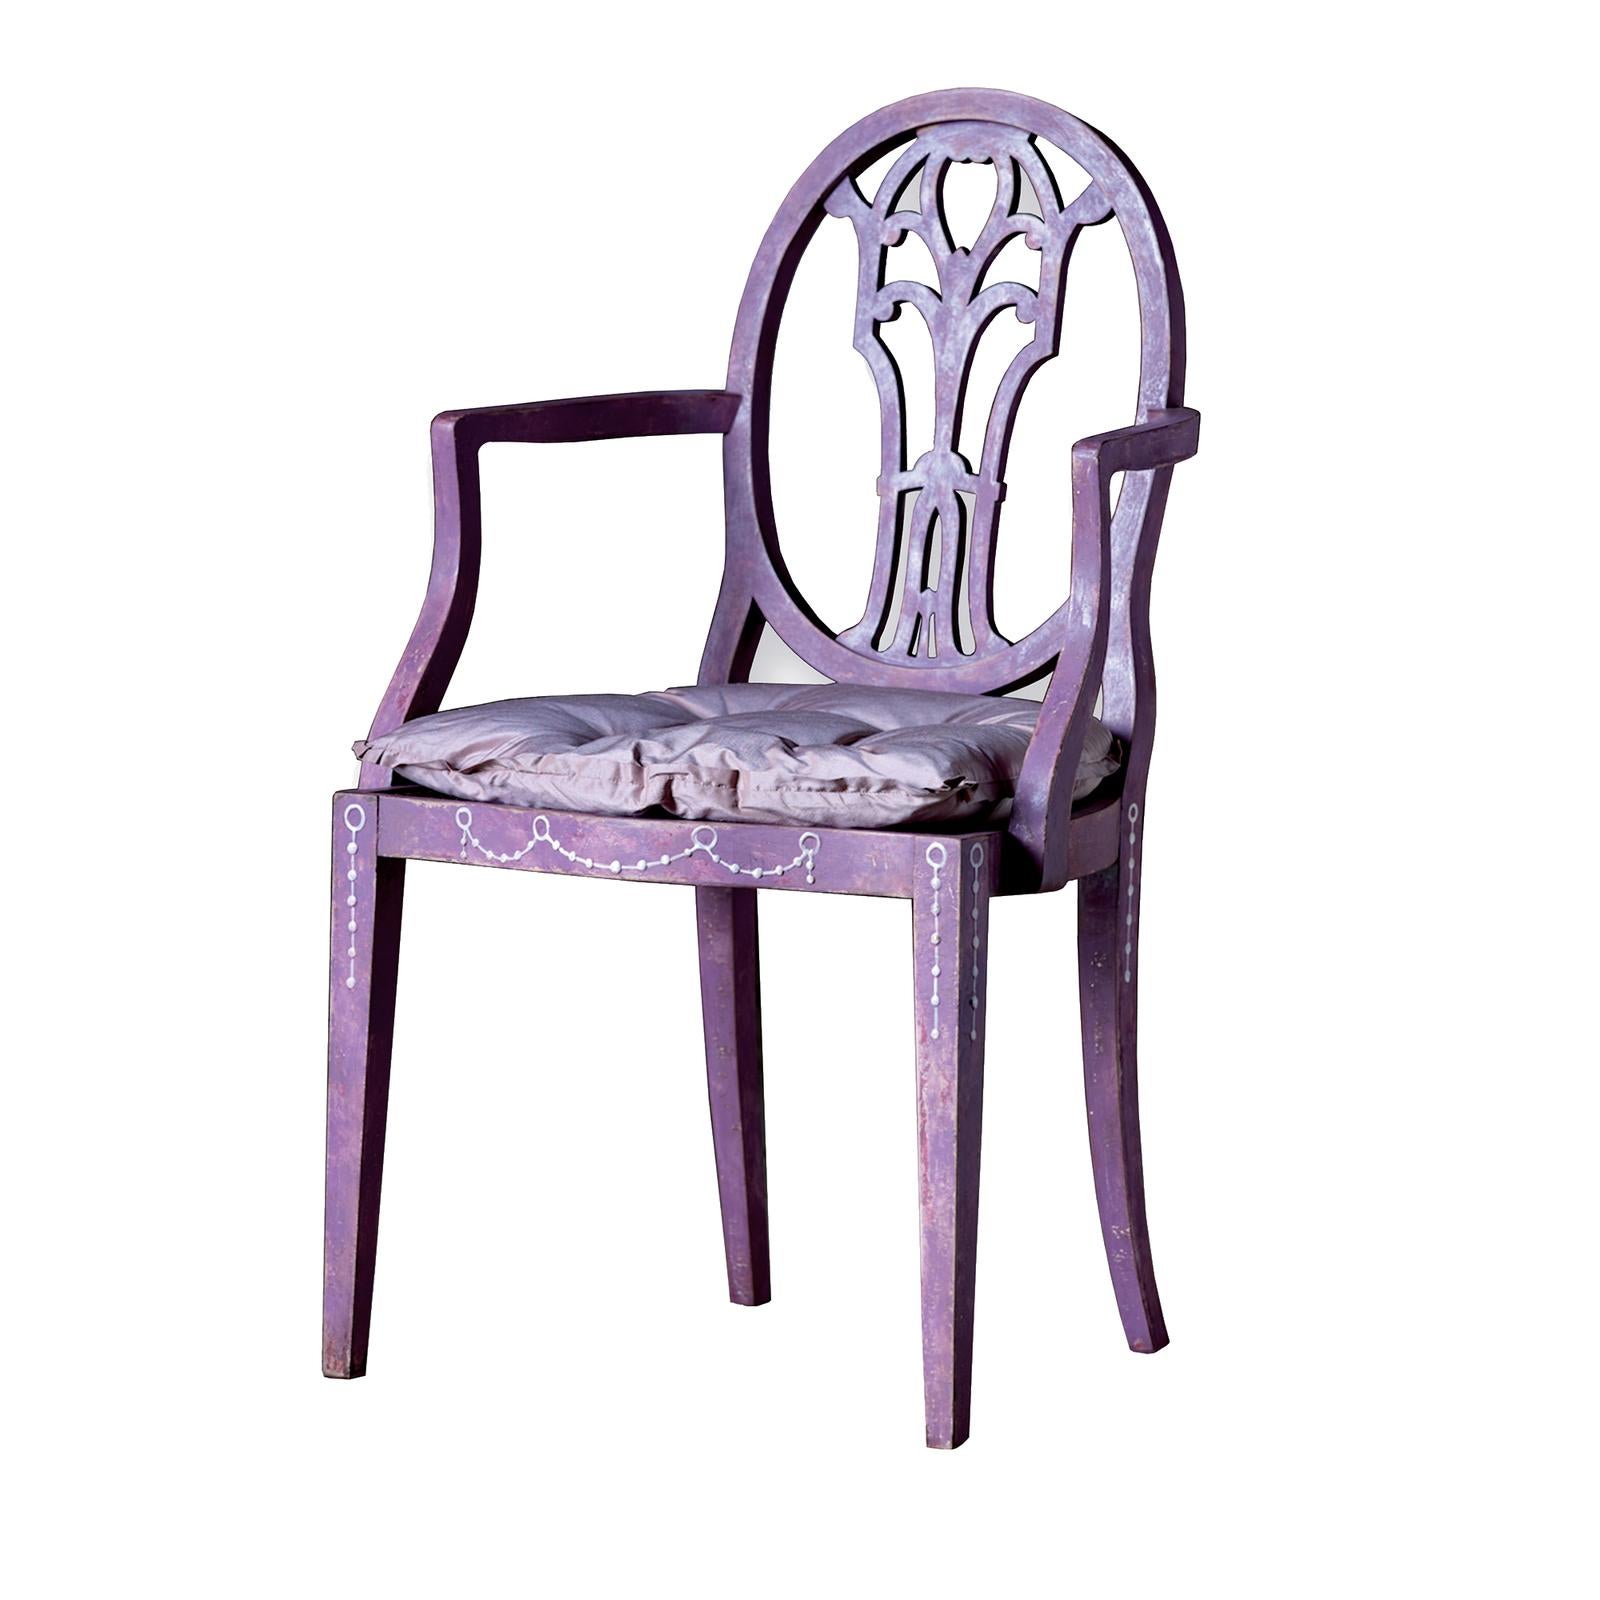 Handcrafted of wood and hand painted in a stunning mauve color, this Venetian style dining arm chair brings a recognizable look into any interior. The oval backrest features a sophisticated carving that, combined with the open armrests, create a